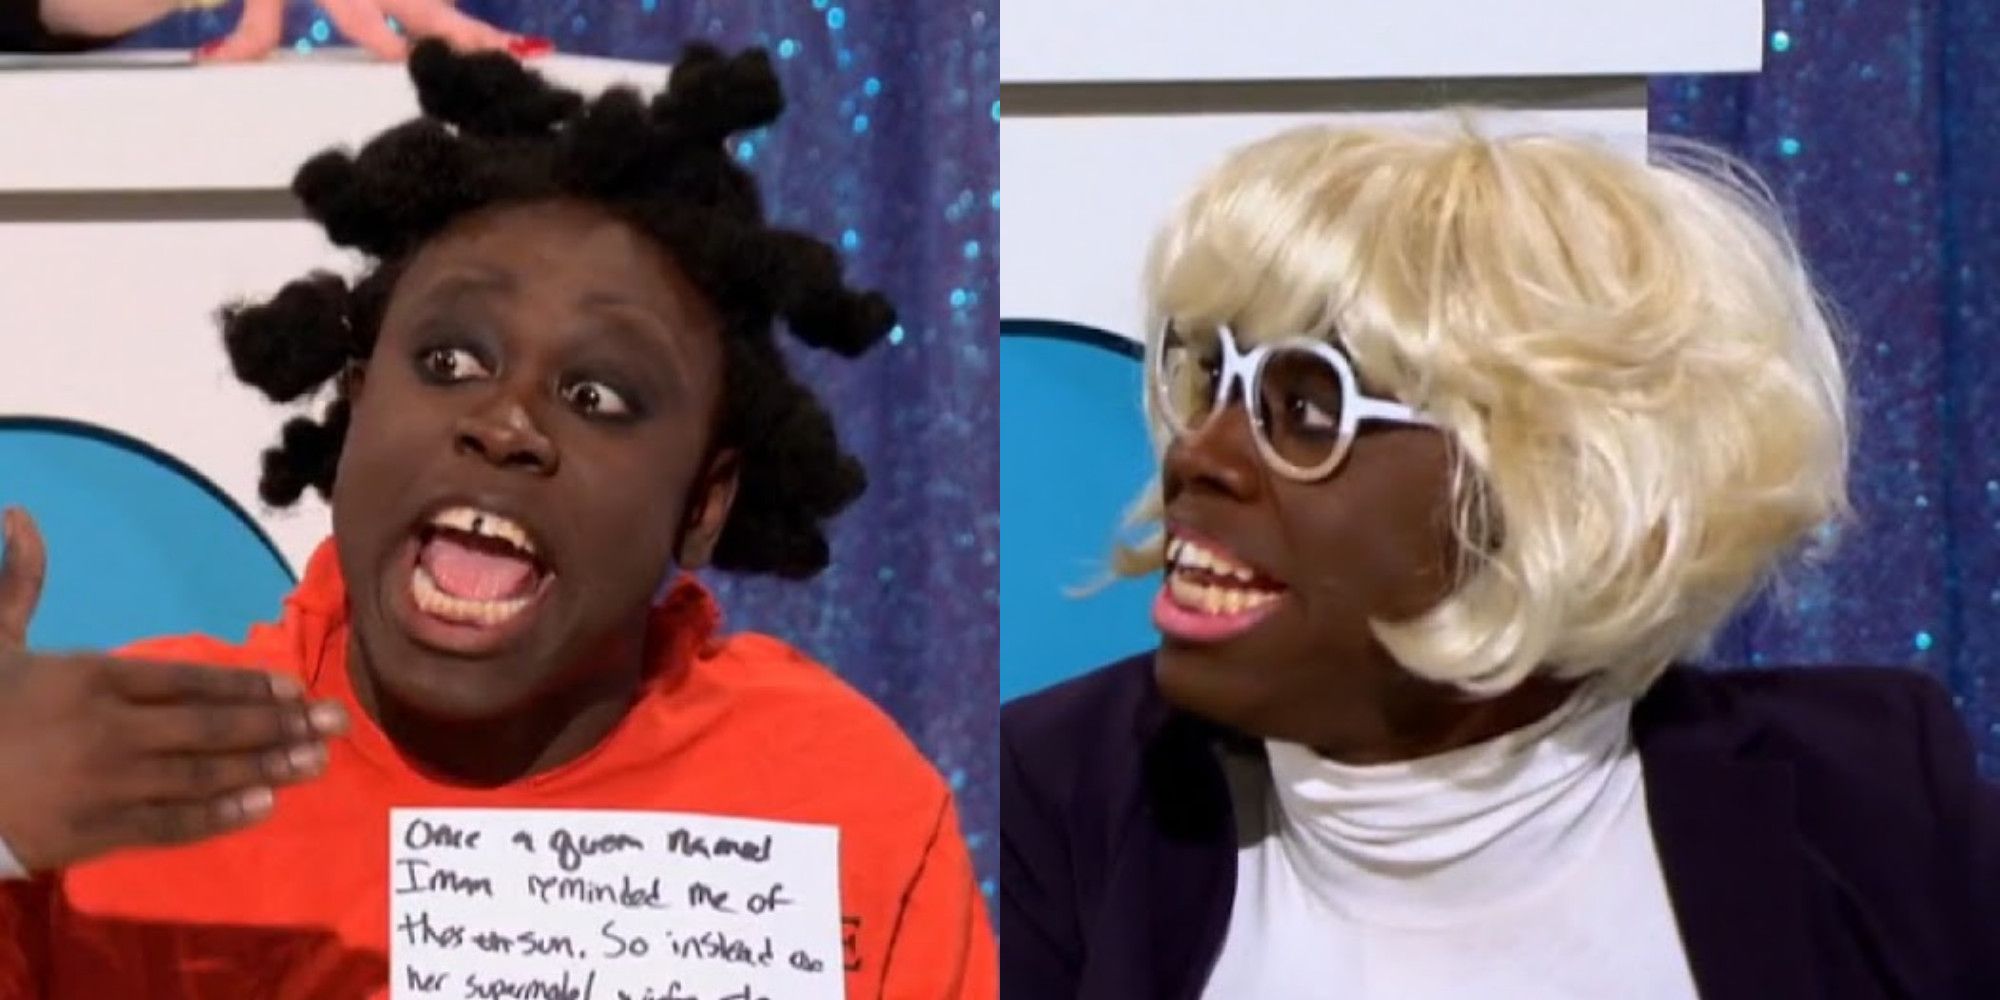 Split image of Bob the Drag Queen as a prisoner and an old woman on RuPaul's Drag Race